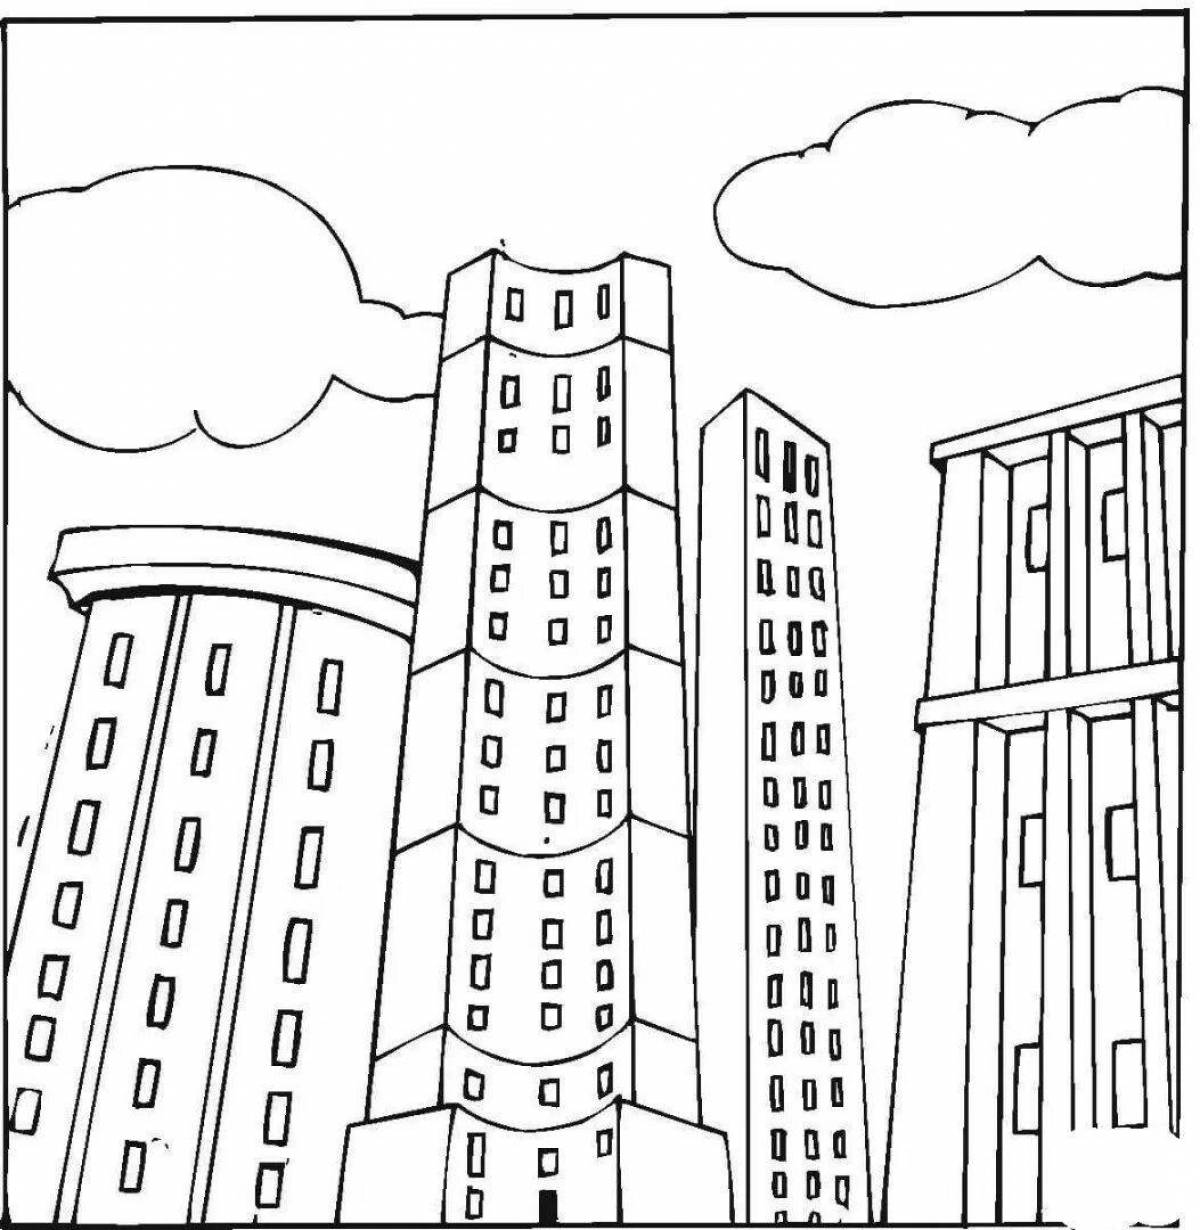 Coloring skyscrapers for kids